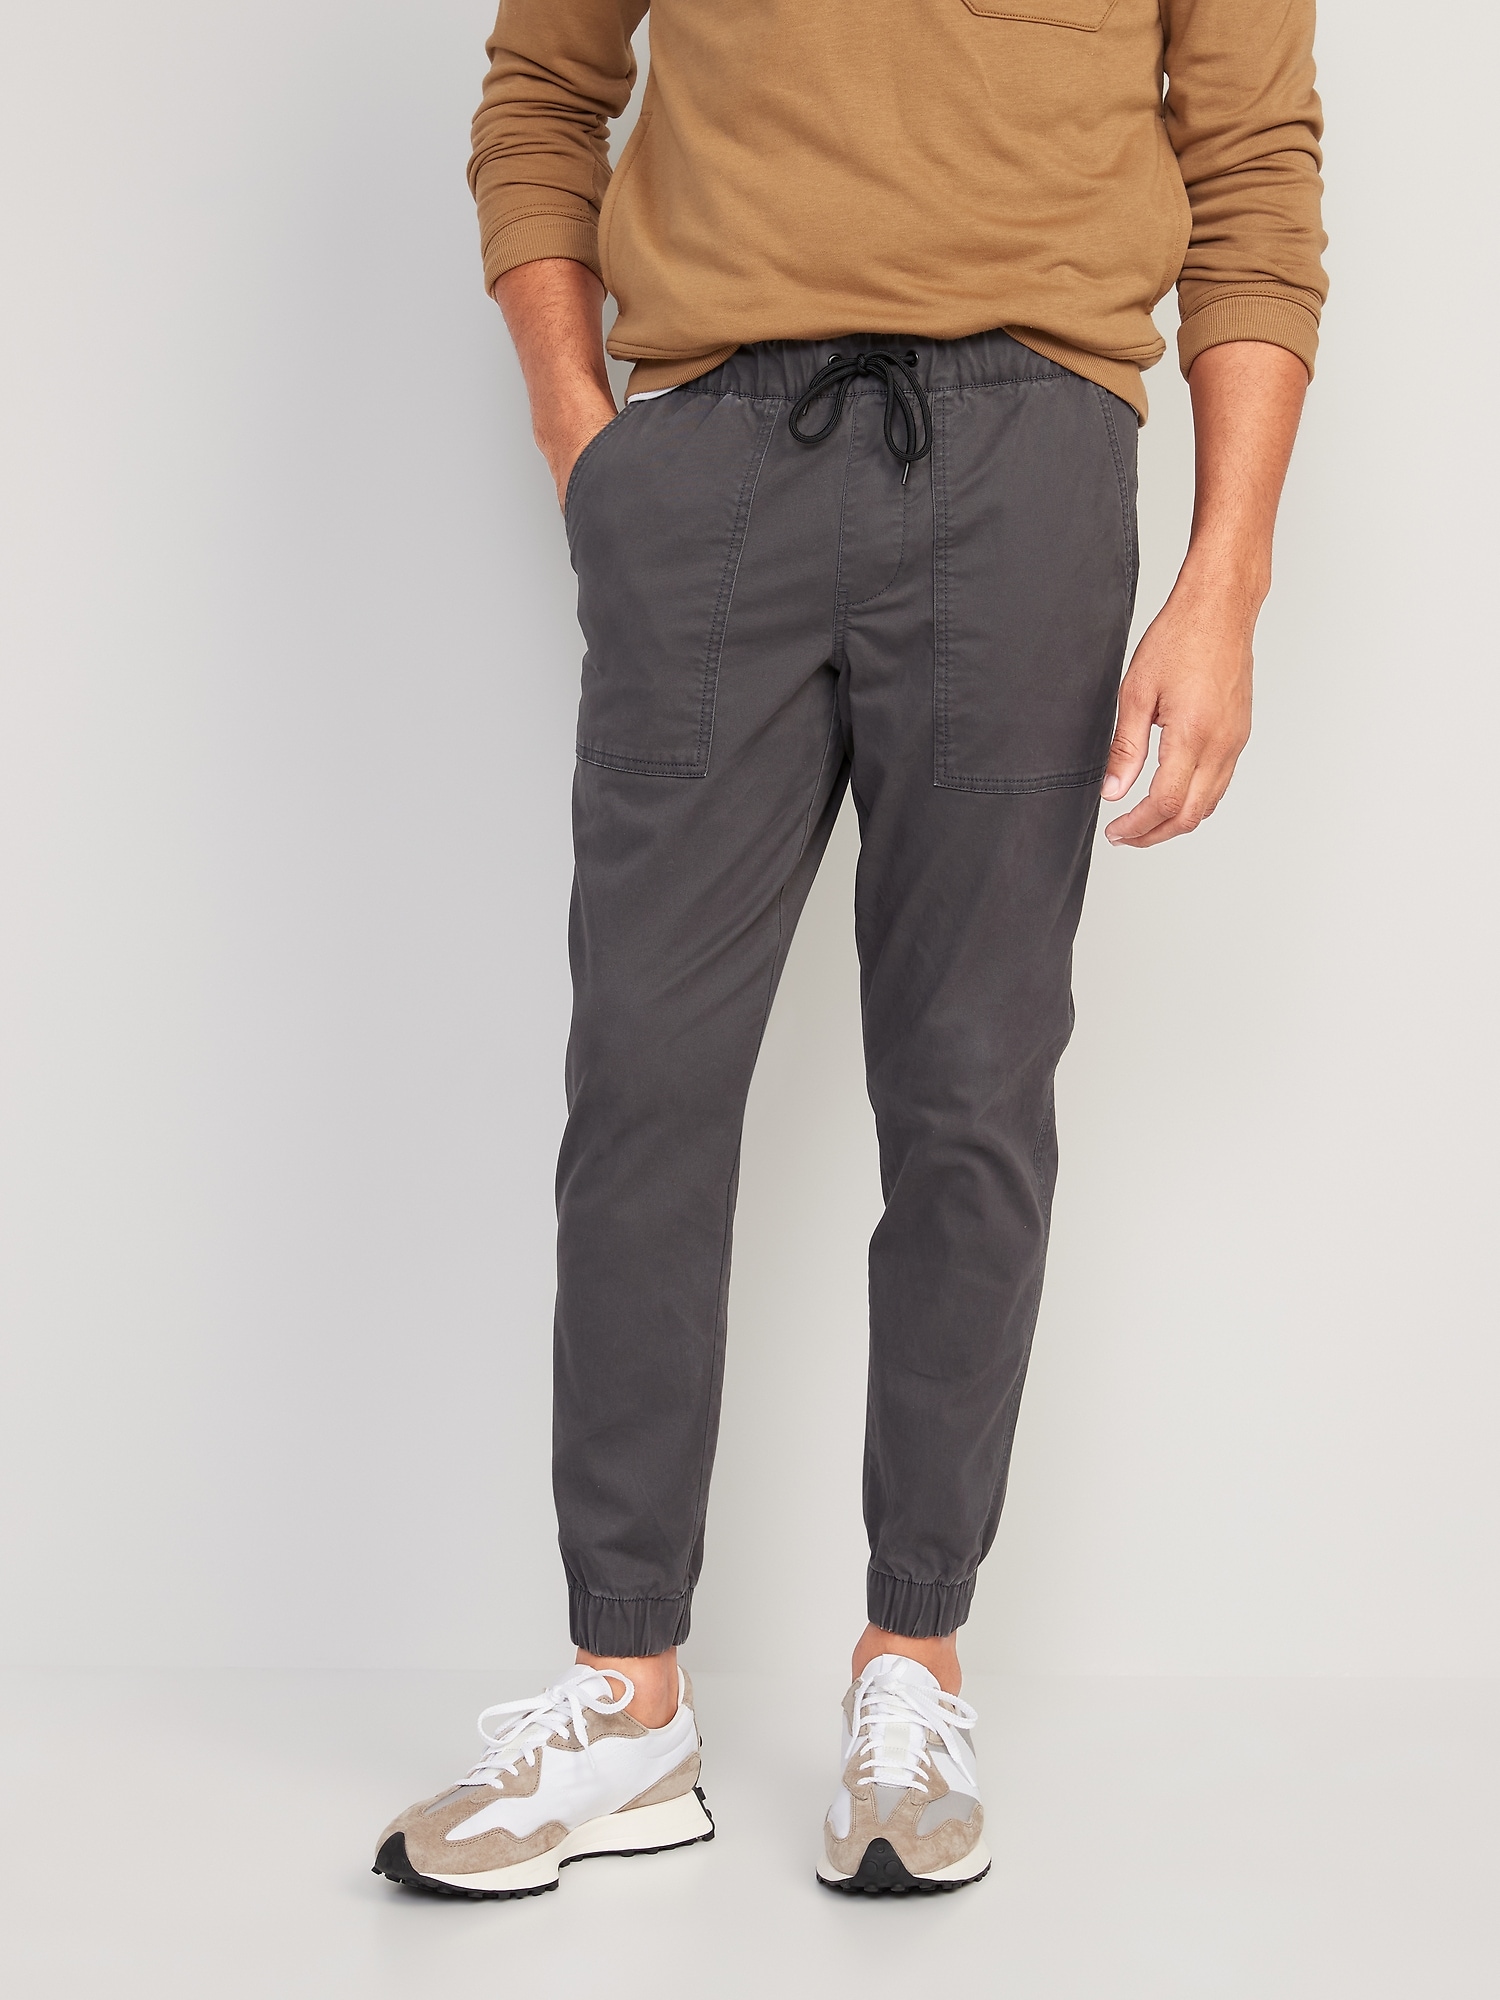 American Twill Joggers - Navy, Gustin, Chinos